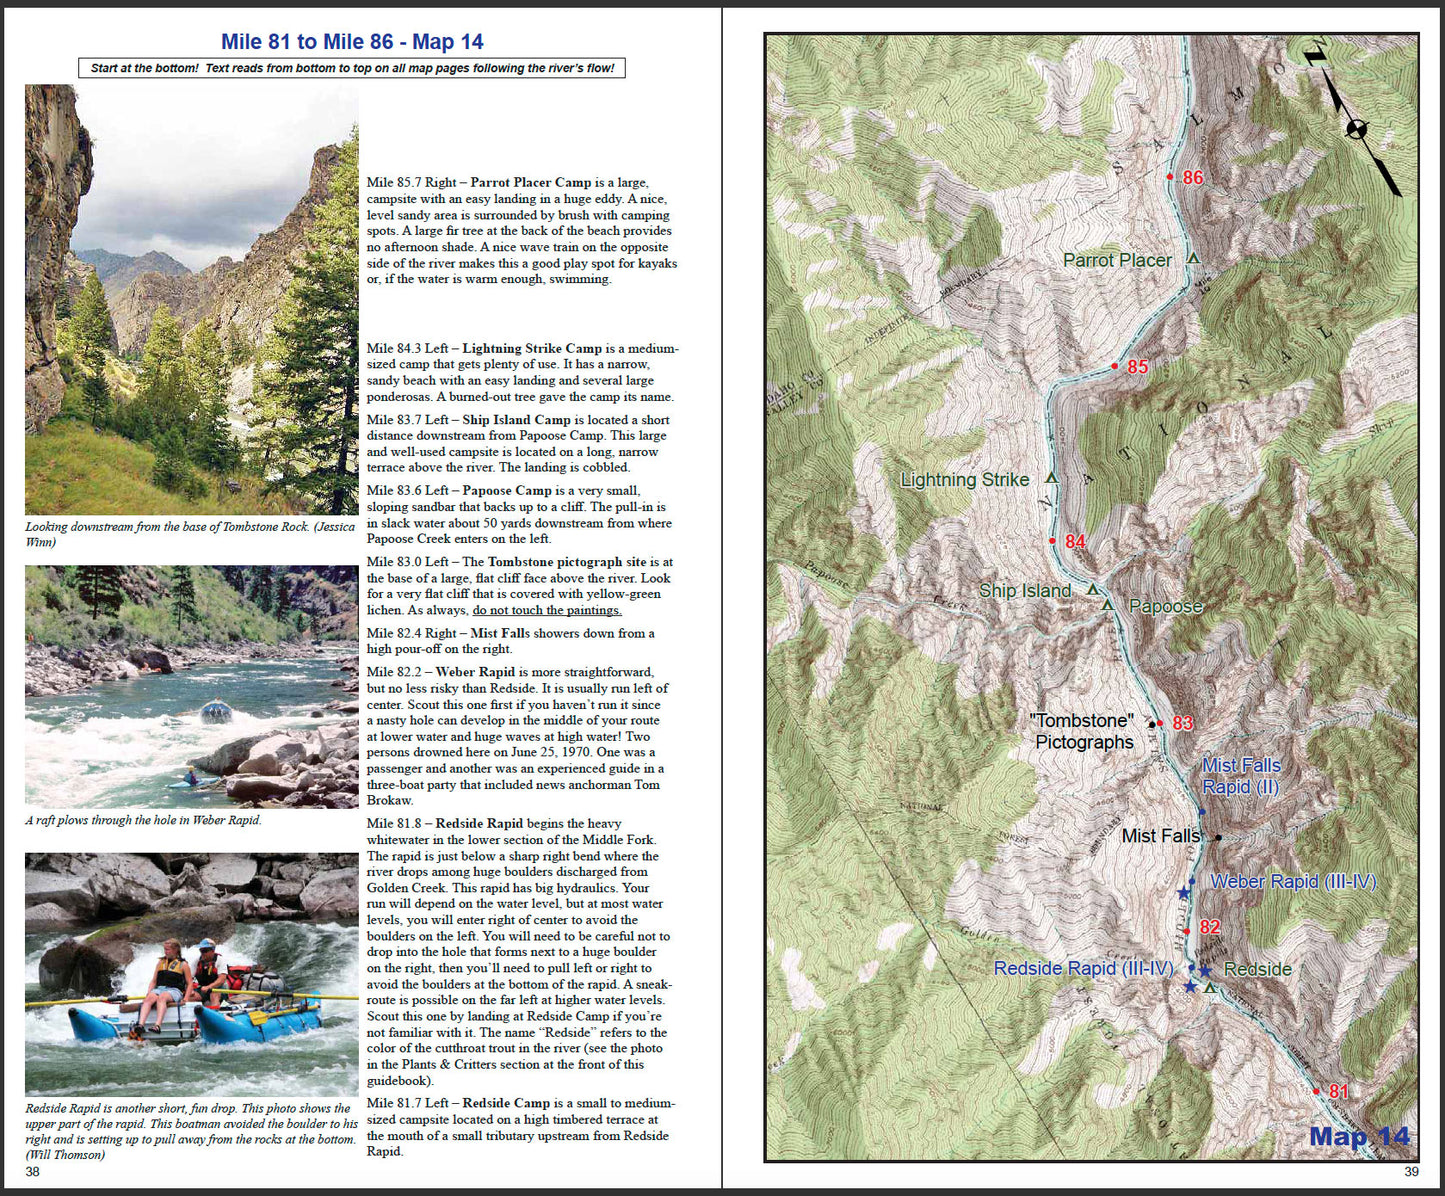 A Rivermaps Guide to the Middle Fork and Main Salmon Rivers, Idaho and guide books for the middle fork.